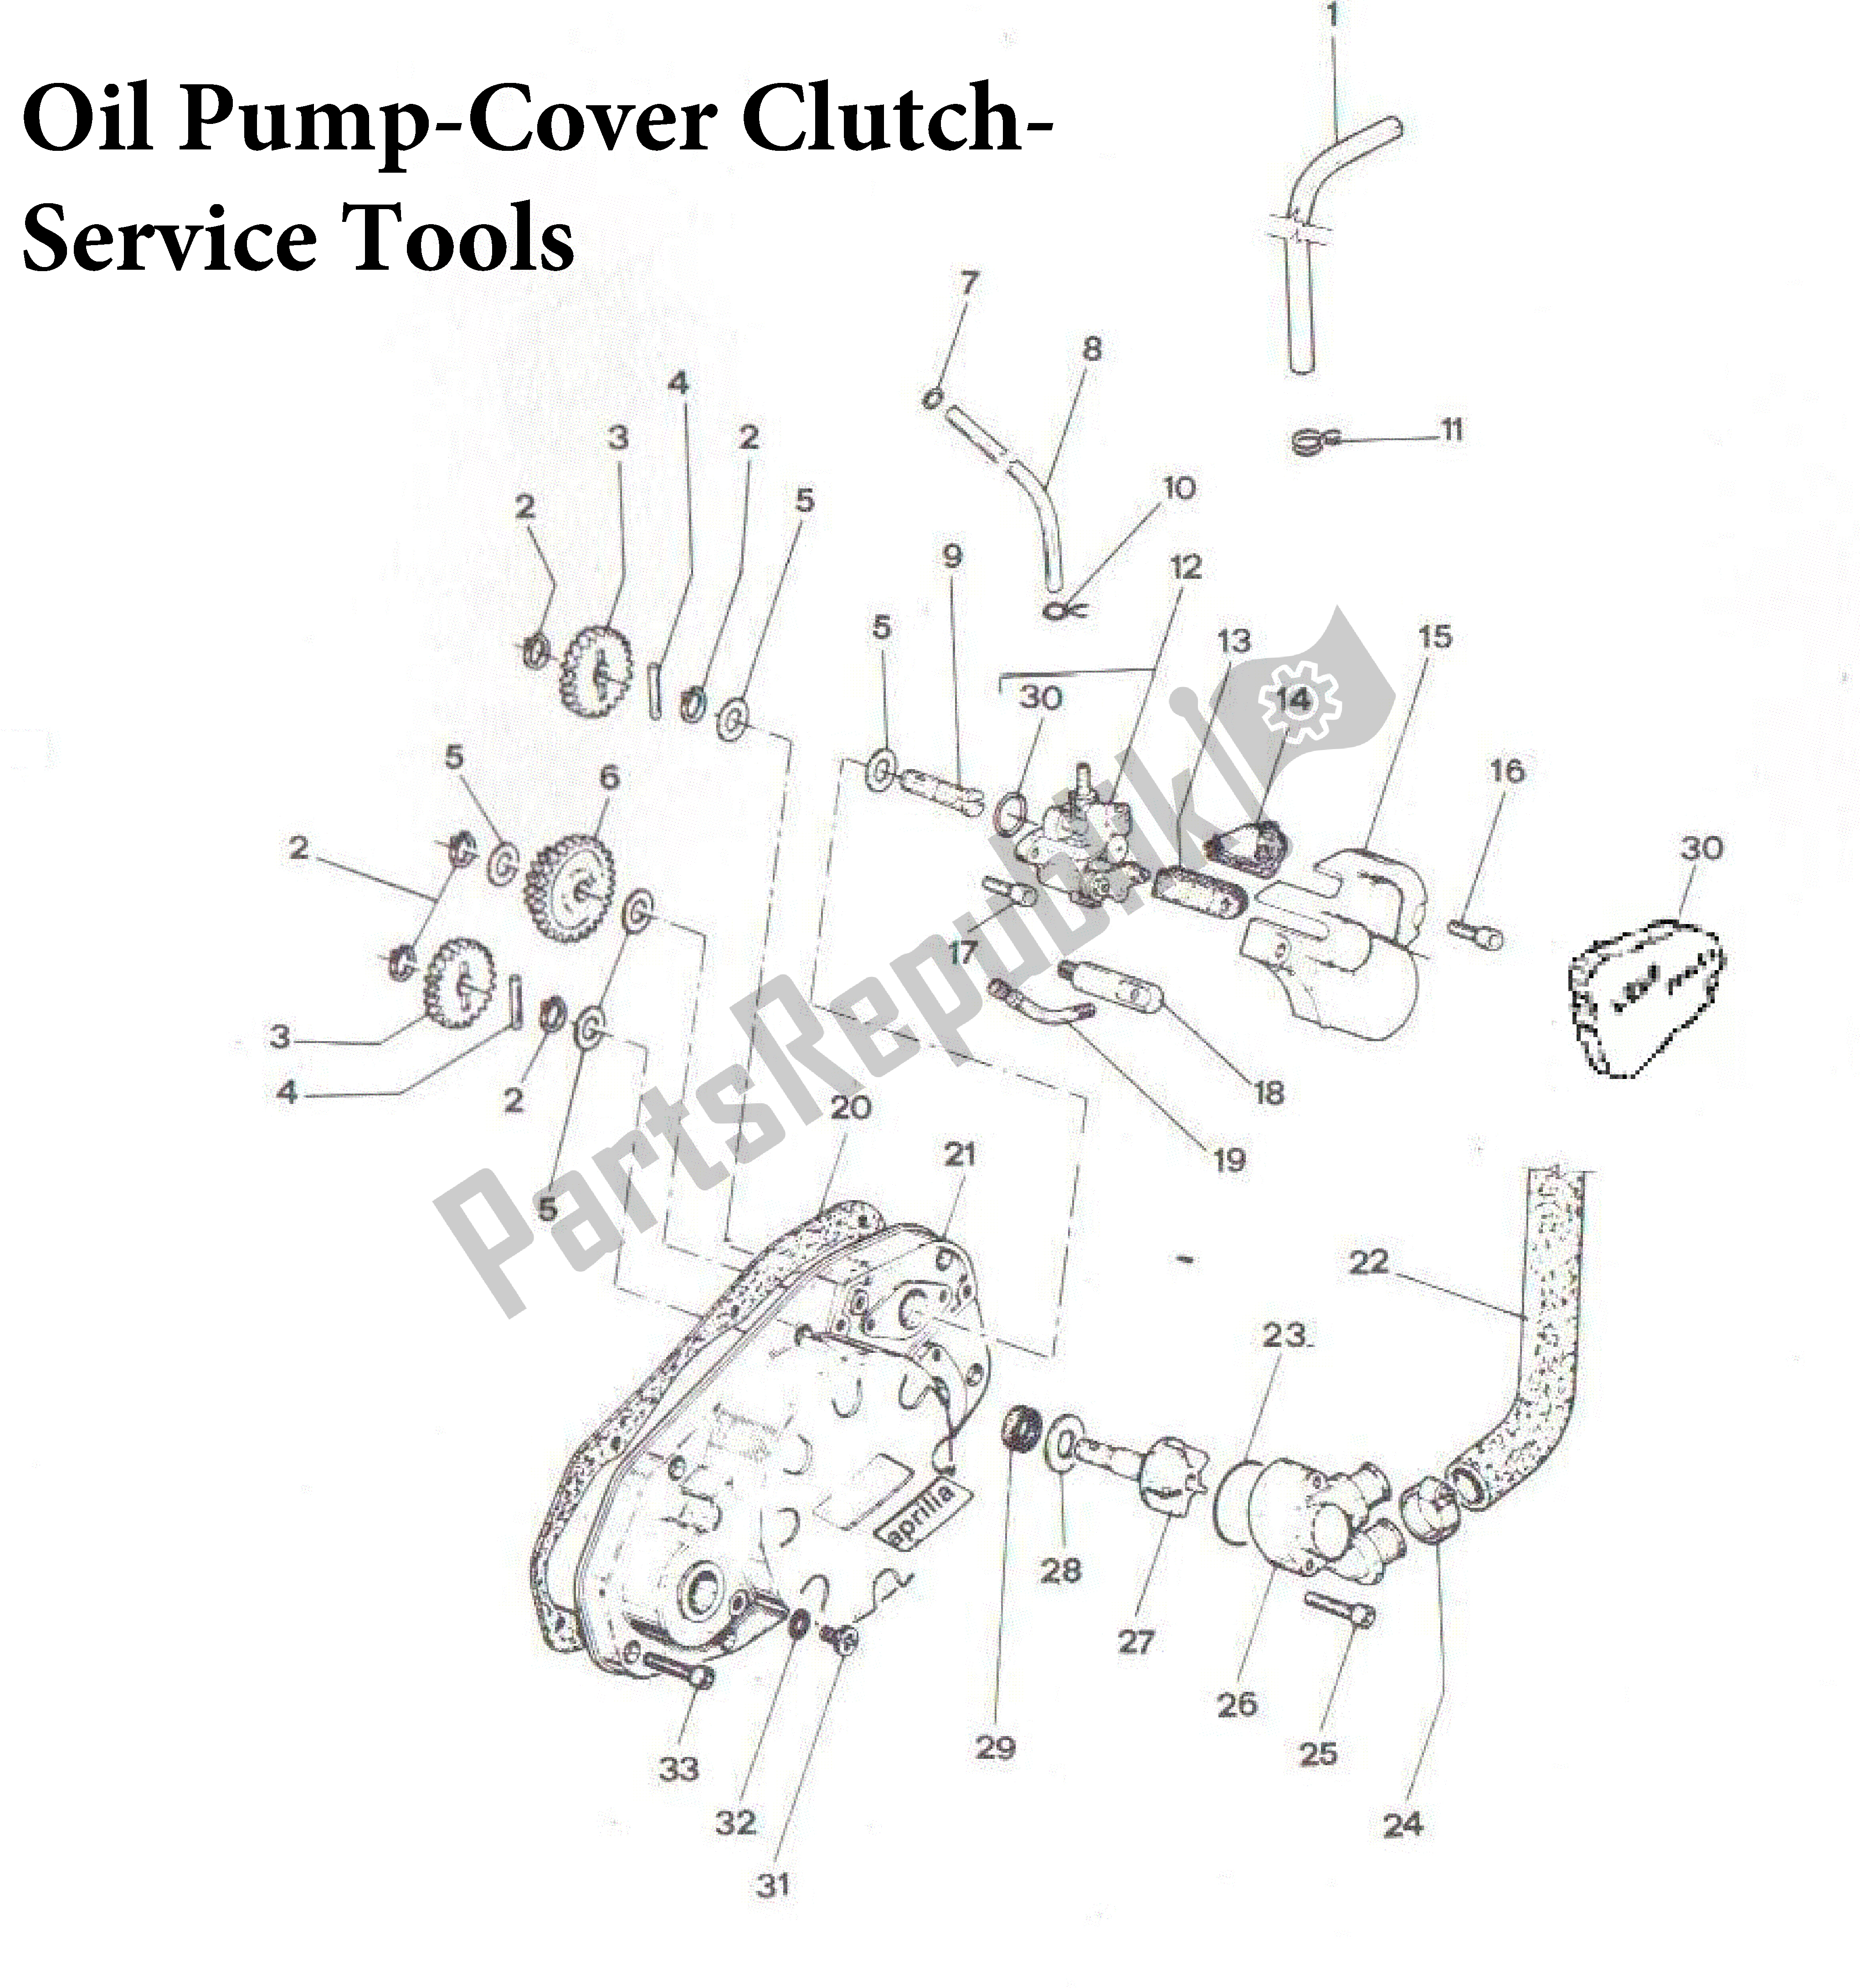 All parts for the Oil Pump-cover Clutch-service Tools of the Aprilia AF1 50 1989